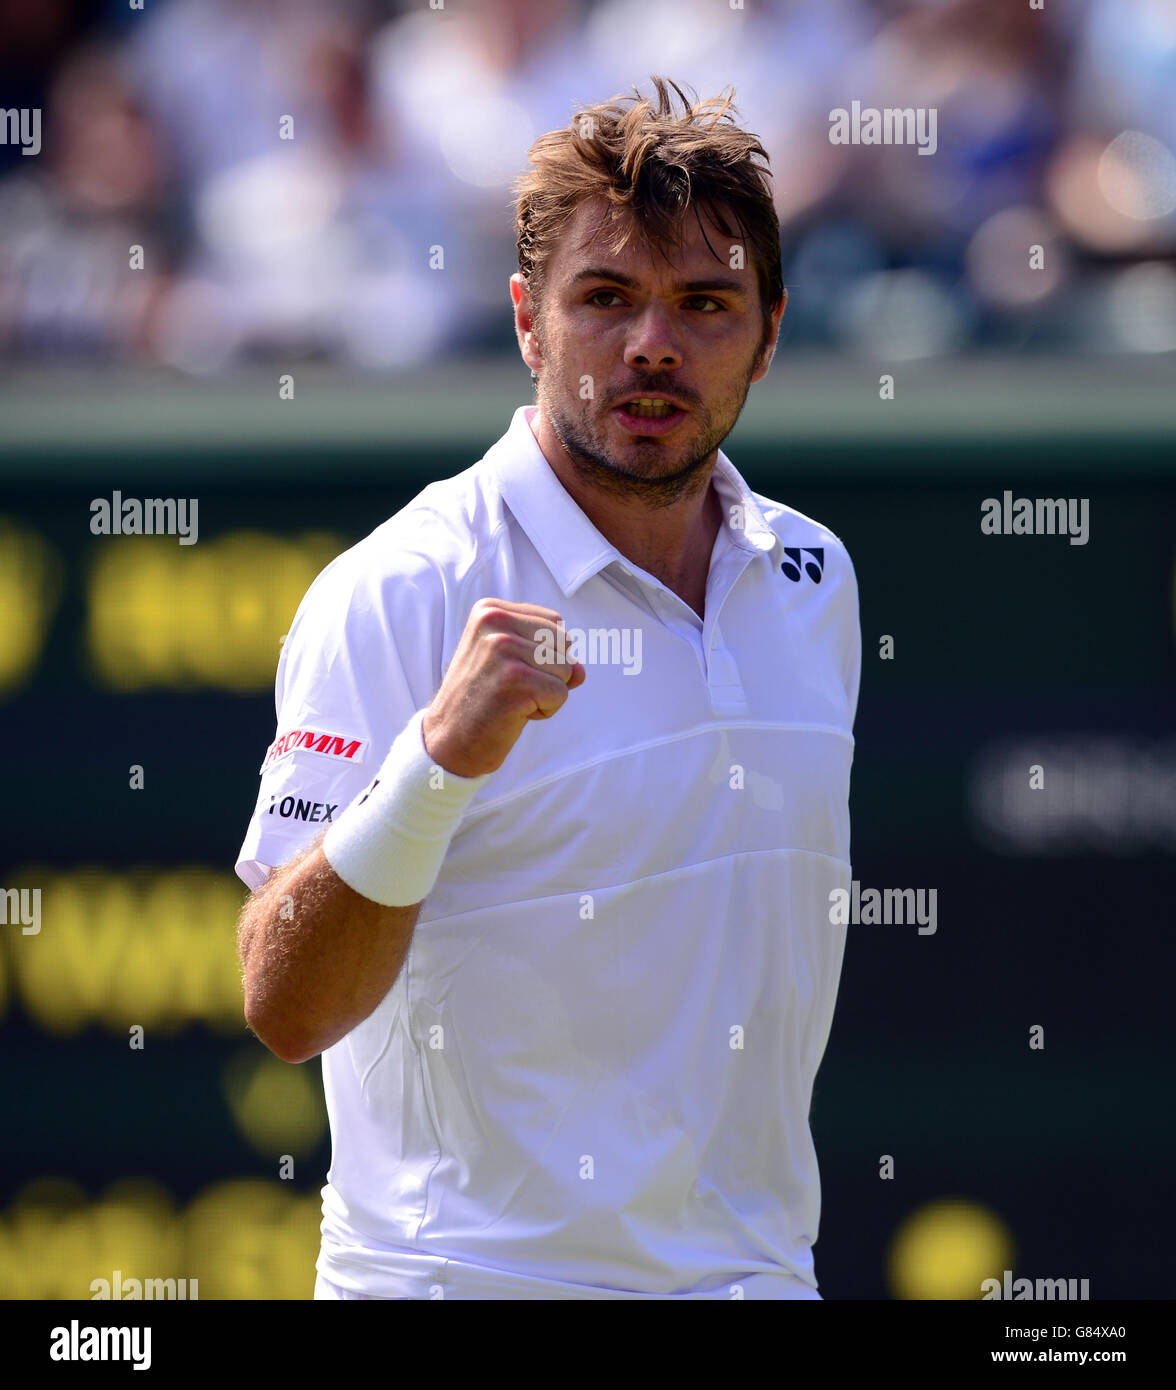 Stan Wawrinka celebrates a point against David Goffin during day Seven of the Wimbledon Championships at the All England Lawn Tennis and Croquet Club, Wimbledon. Stock Photo